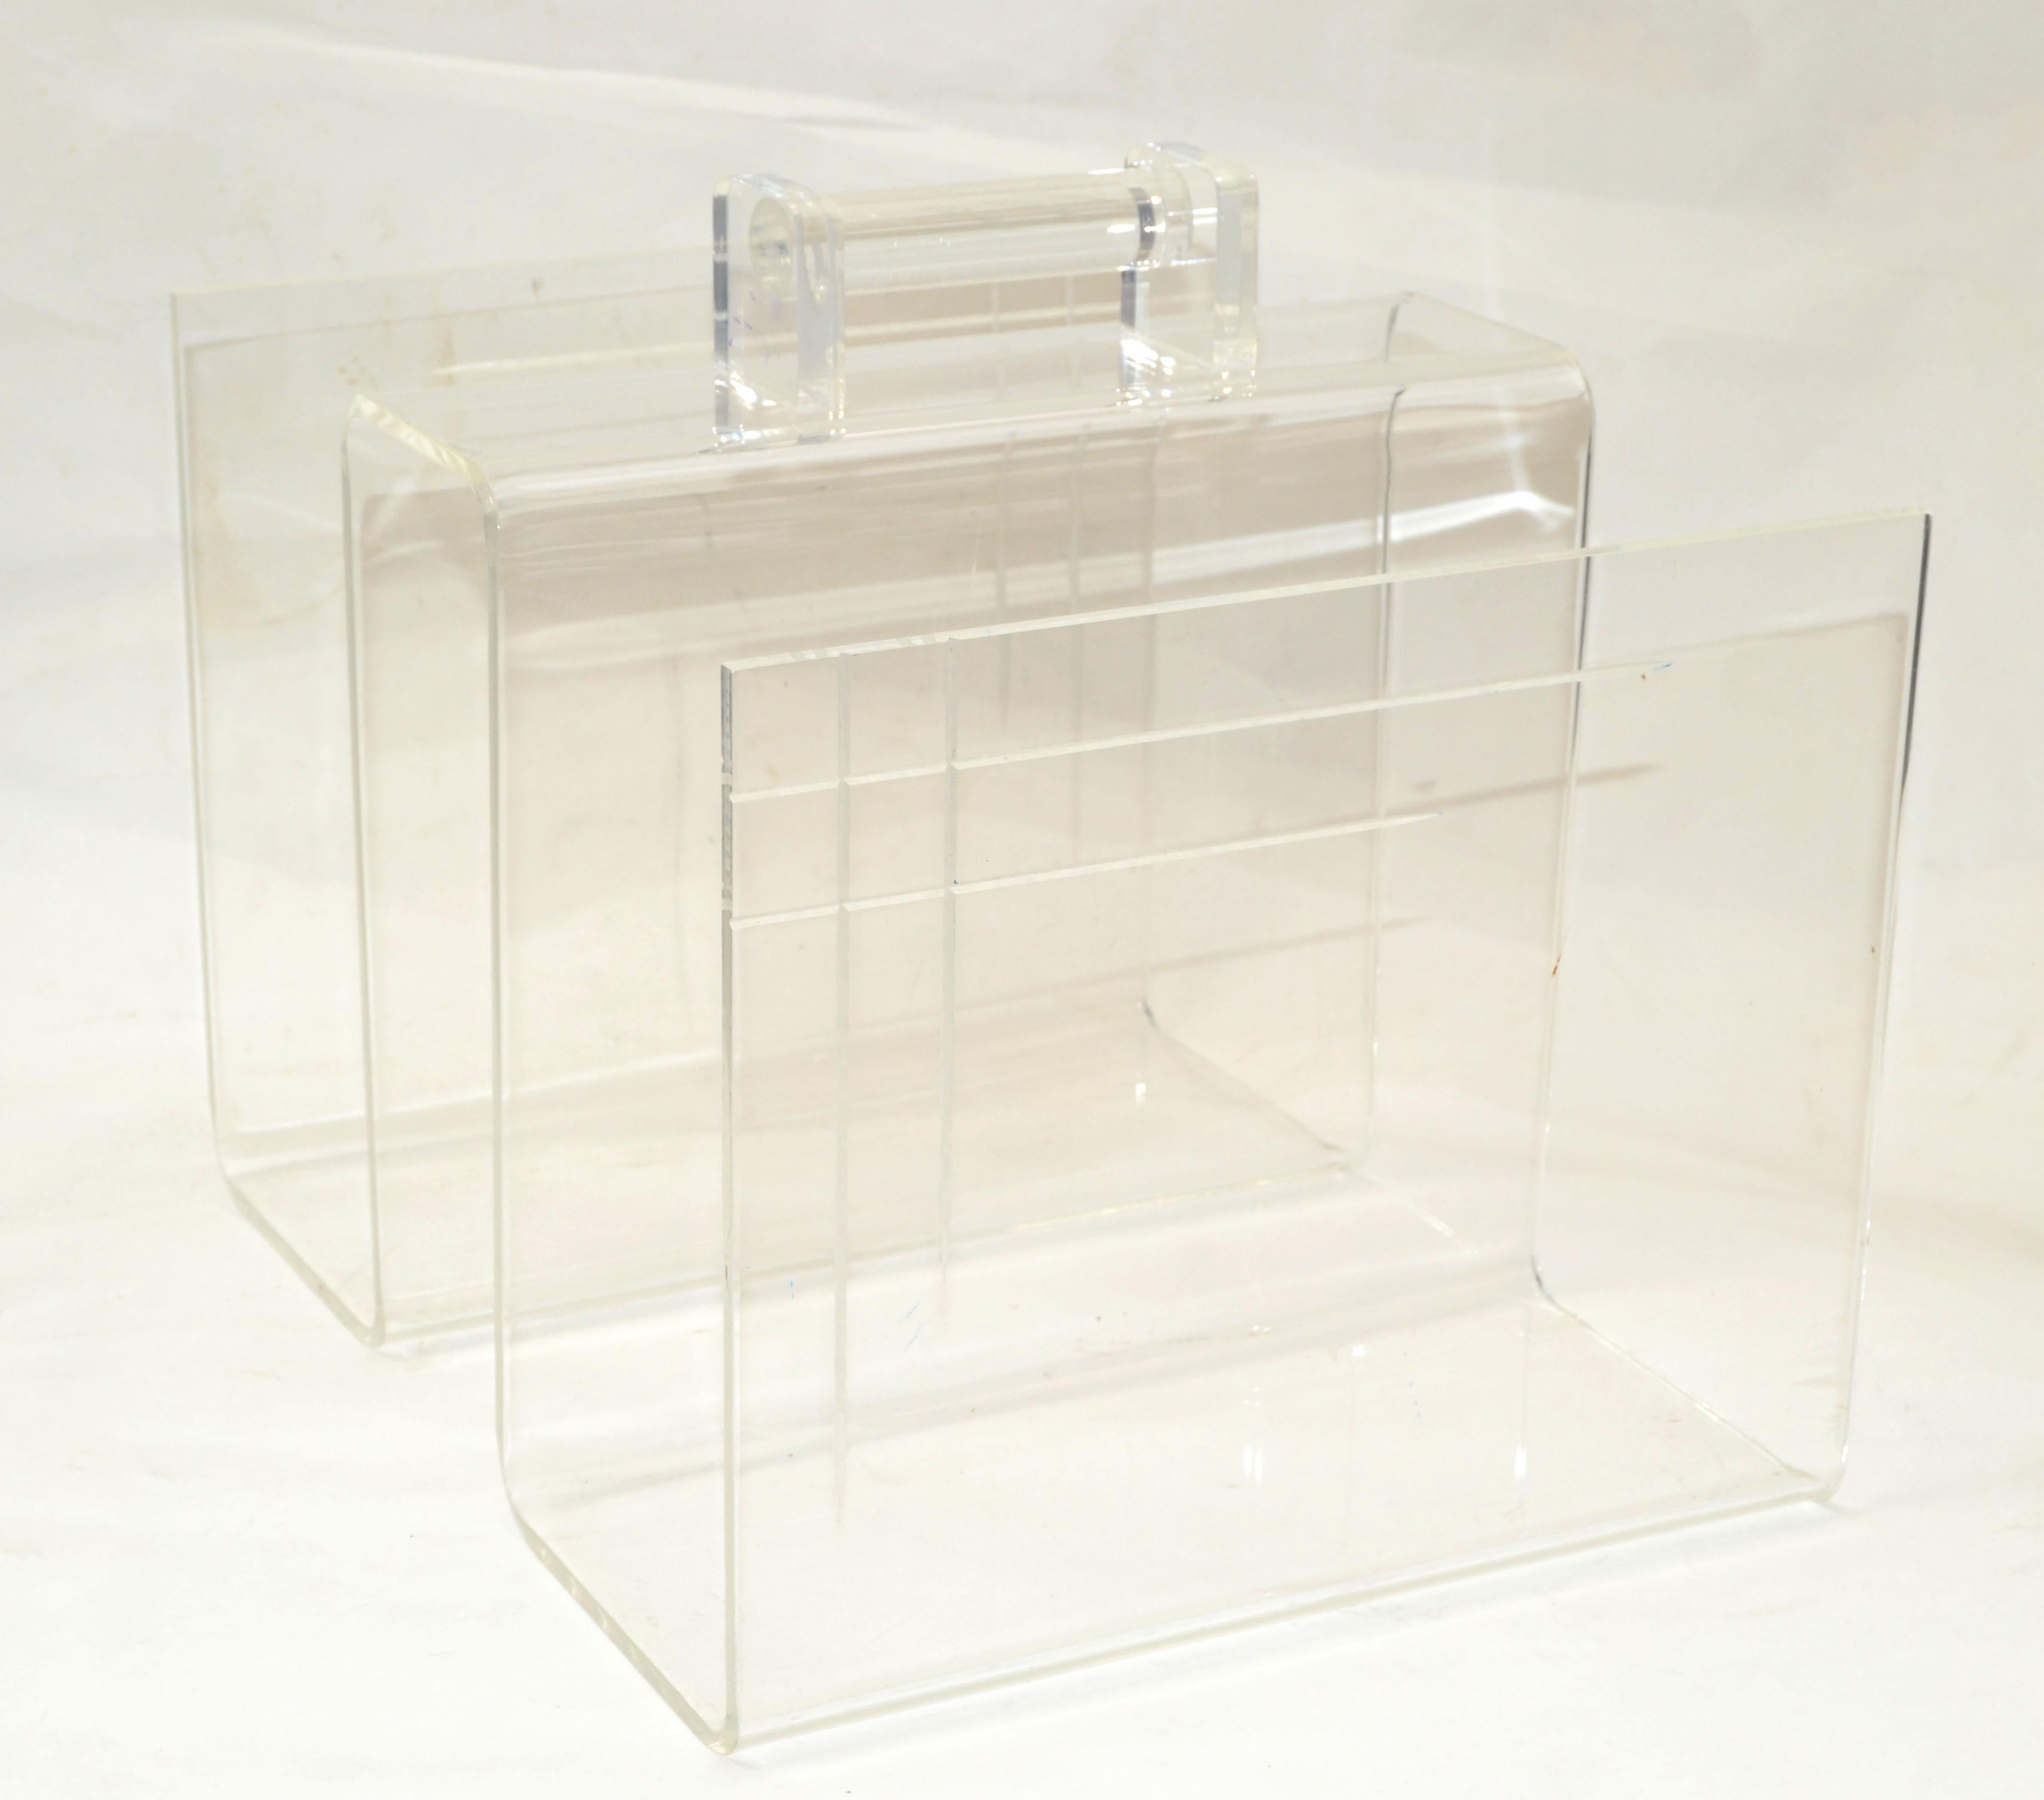 Mid-Century Modern magazine rack, Newspaper Stand in Lucite with etched details to the sides.
Beautiful piece for any interior design to store your favorite magazines or books.